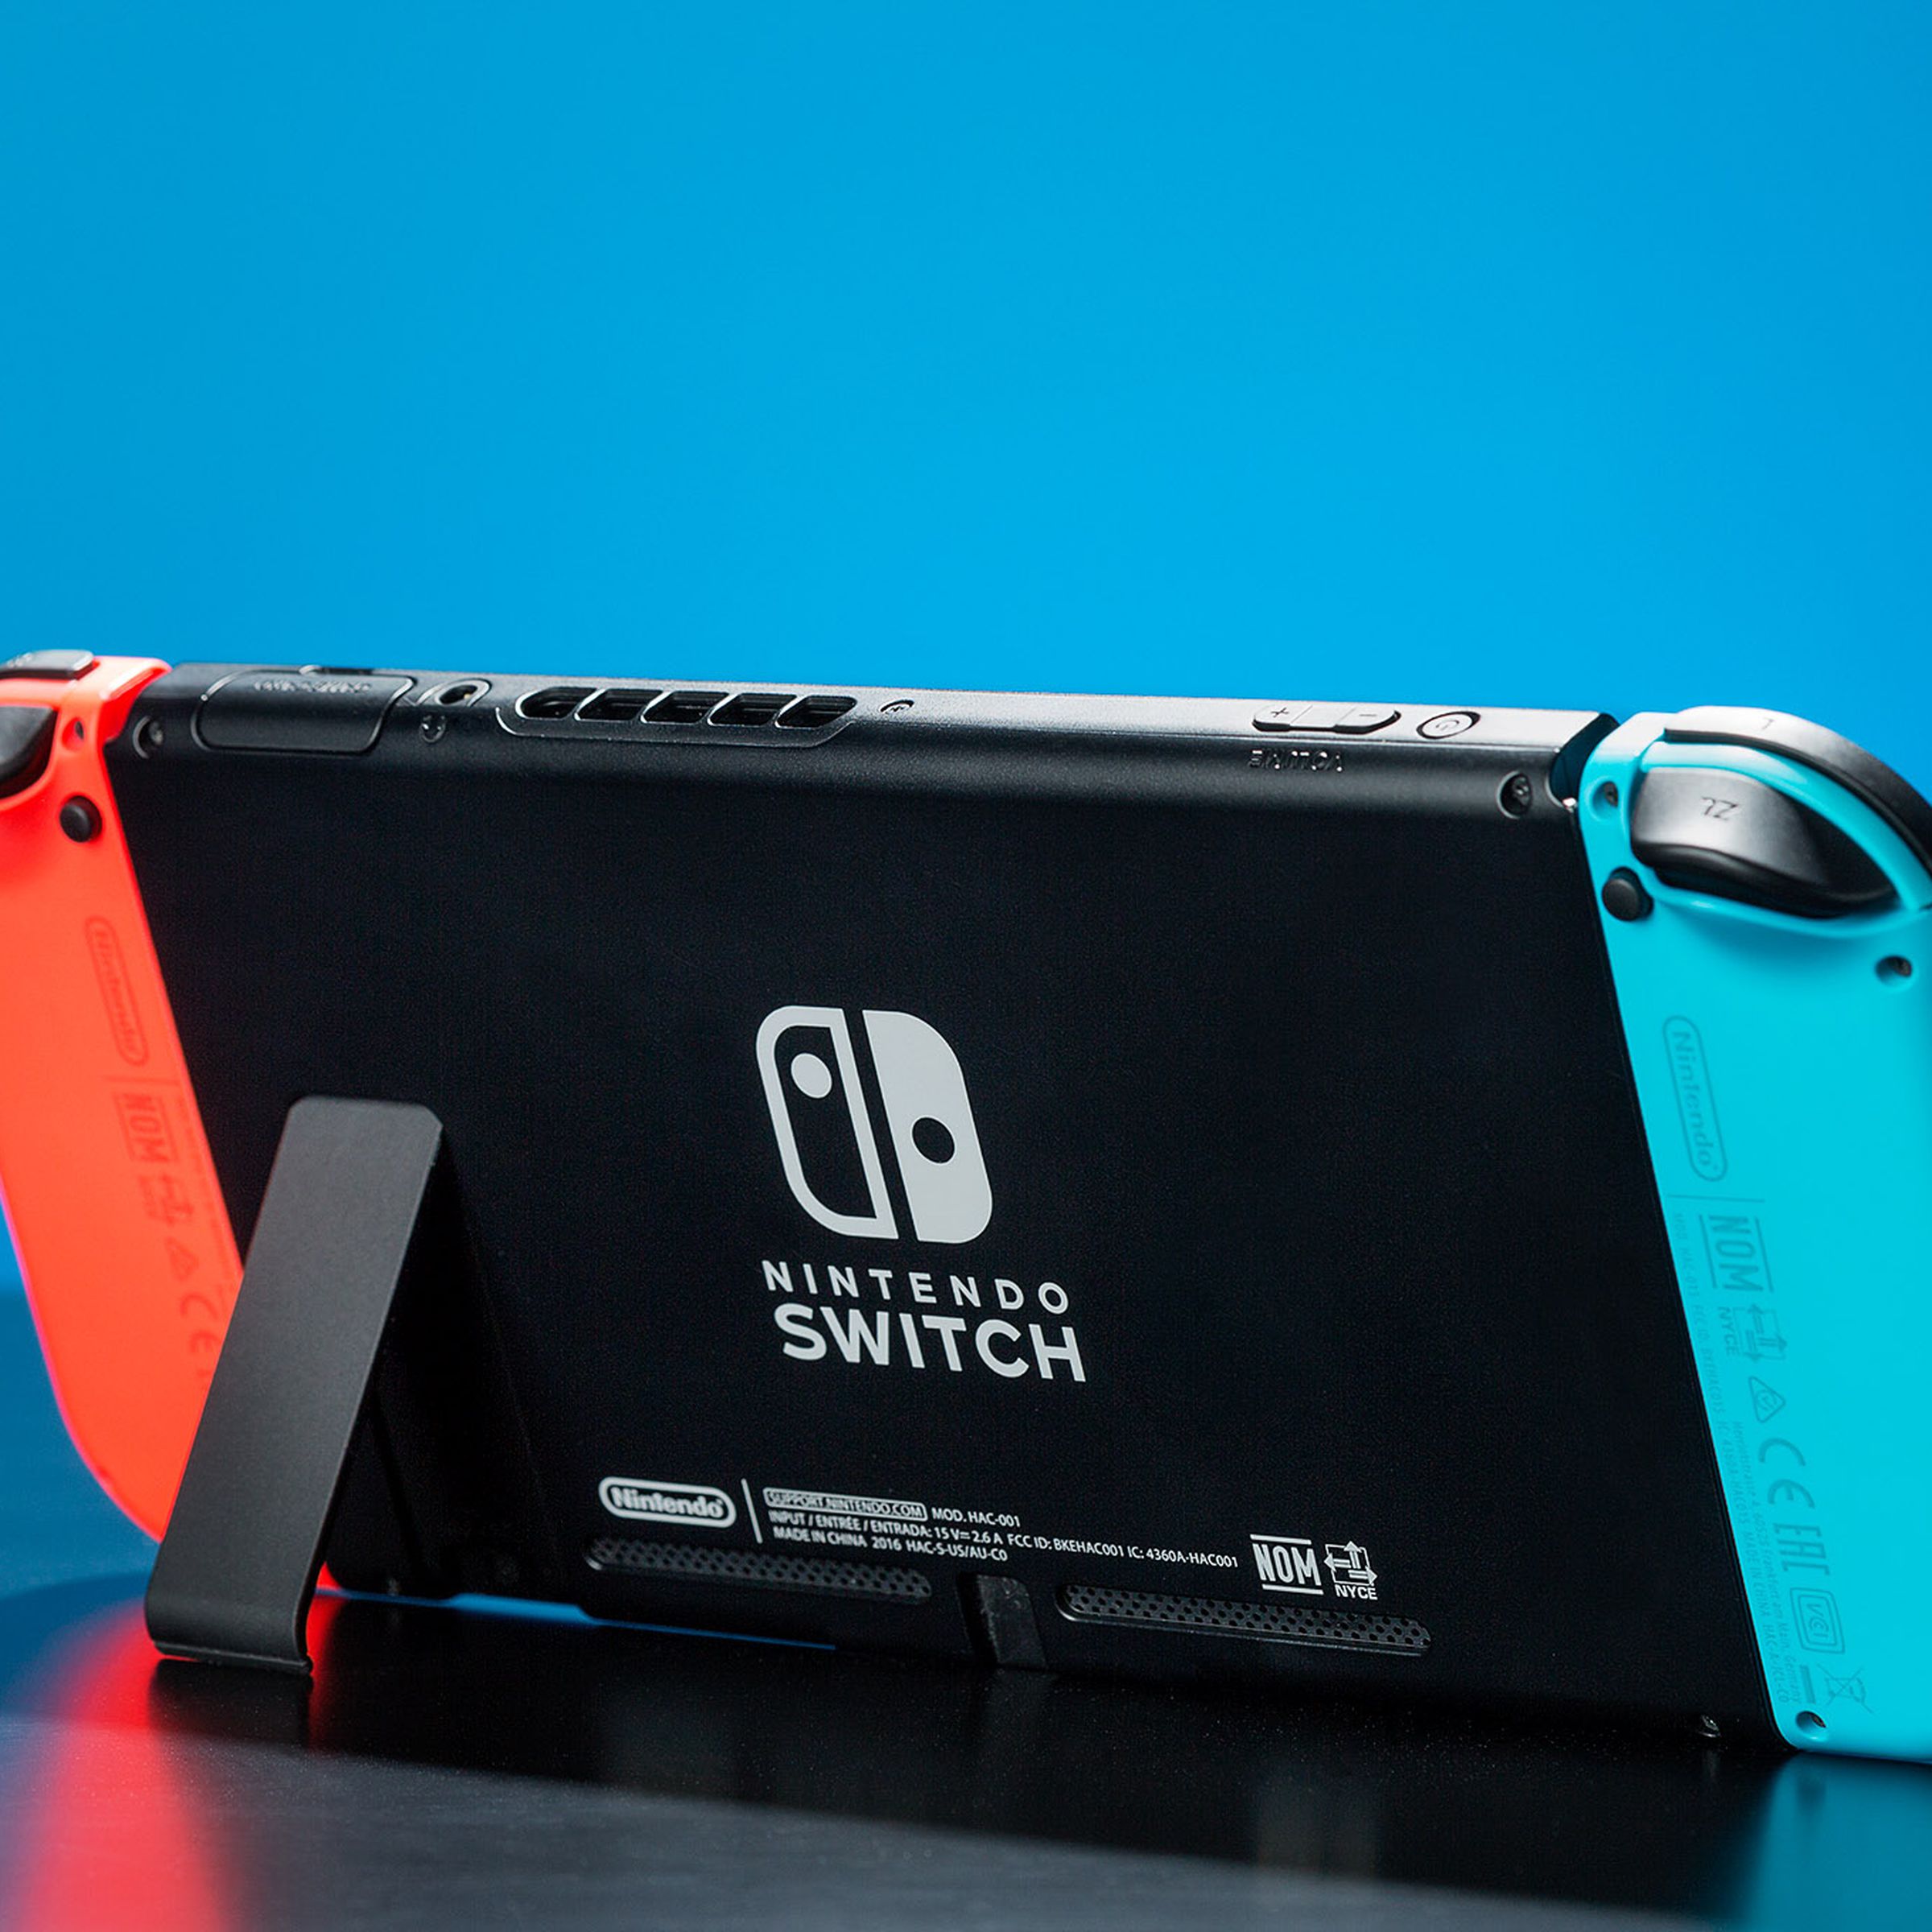 An image of a Nintendo Switch on a table with its kickstand extended.